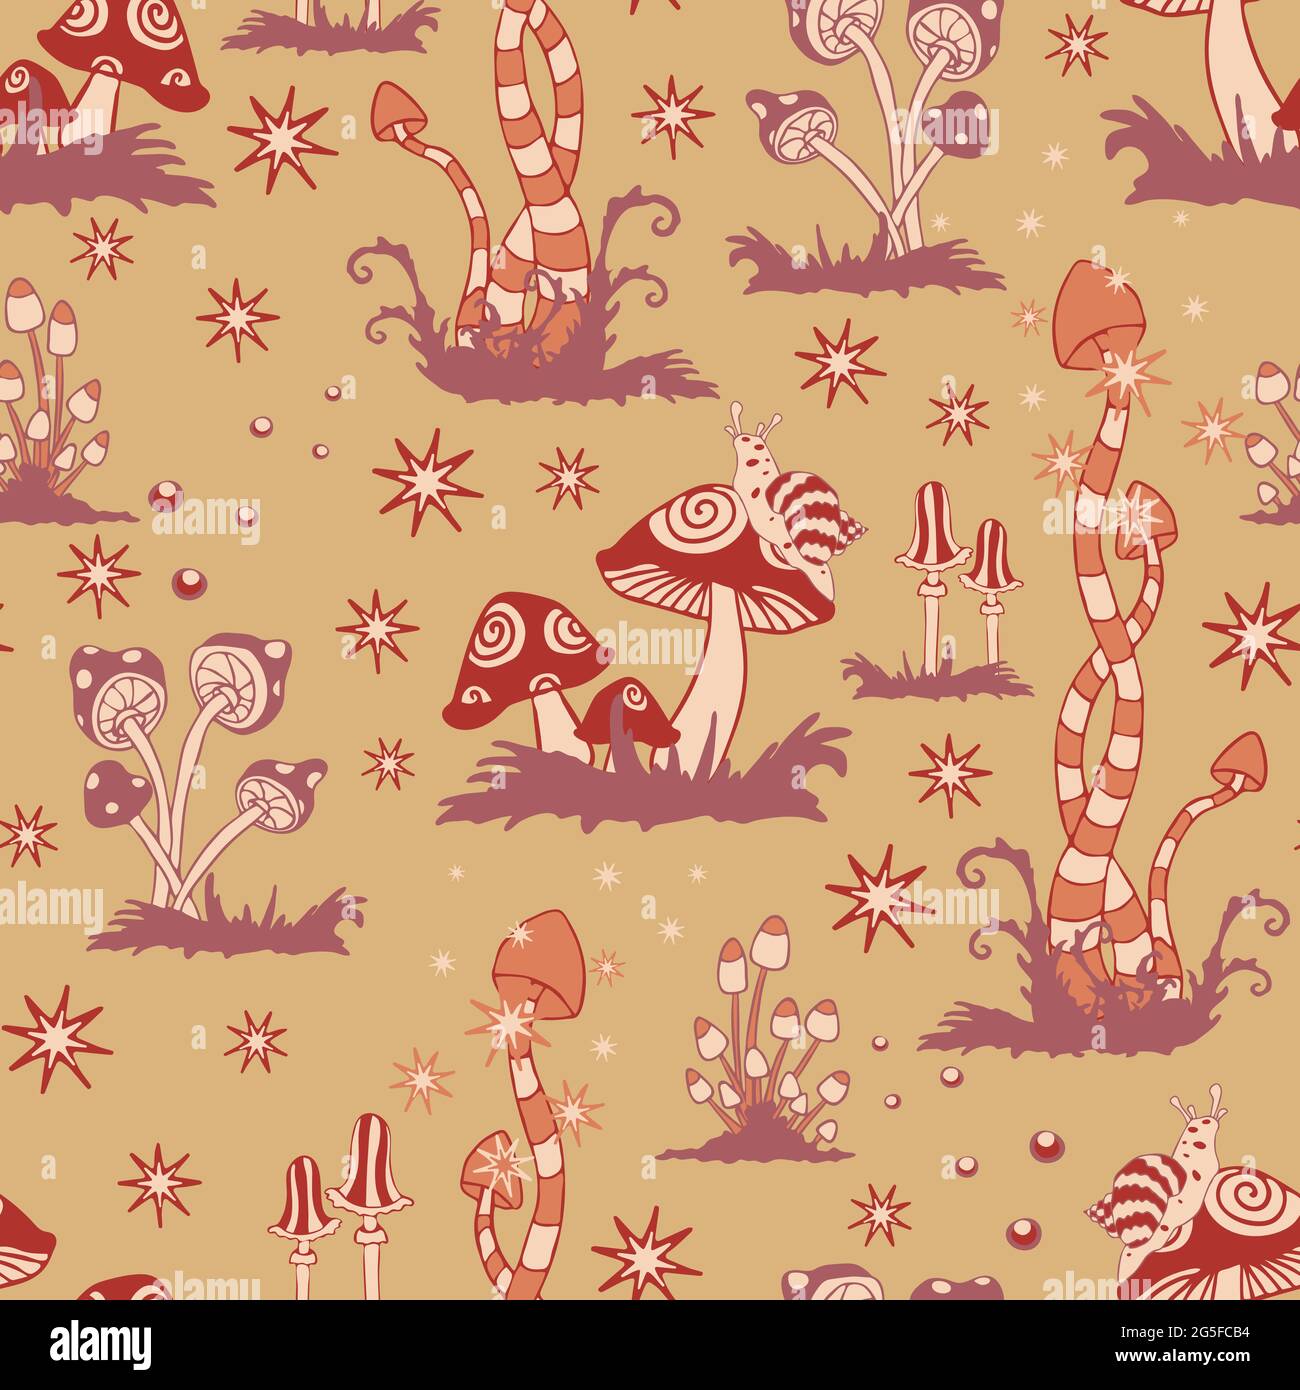 Seamless vector pattern with red mushrooms on pink background. Fantasy landscape wallpaper design. Ethnic fashion textile. Stock Vector